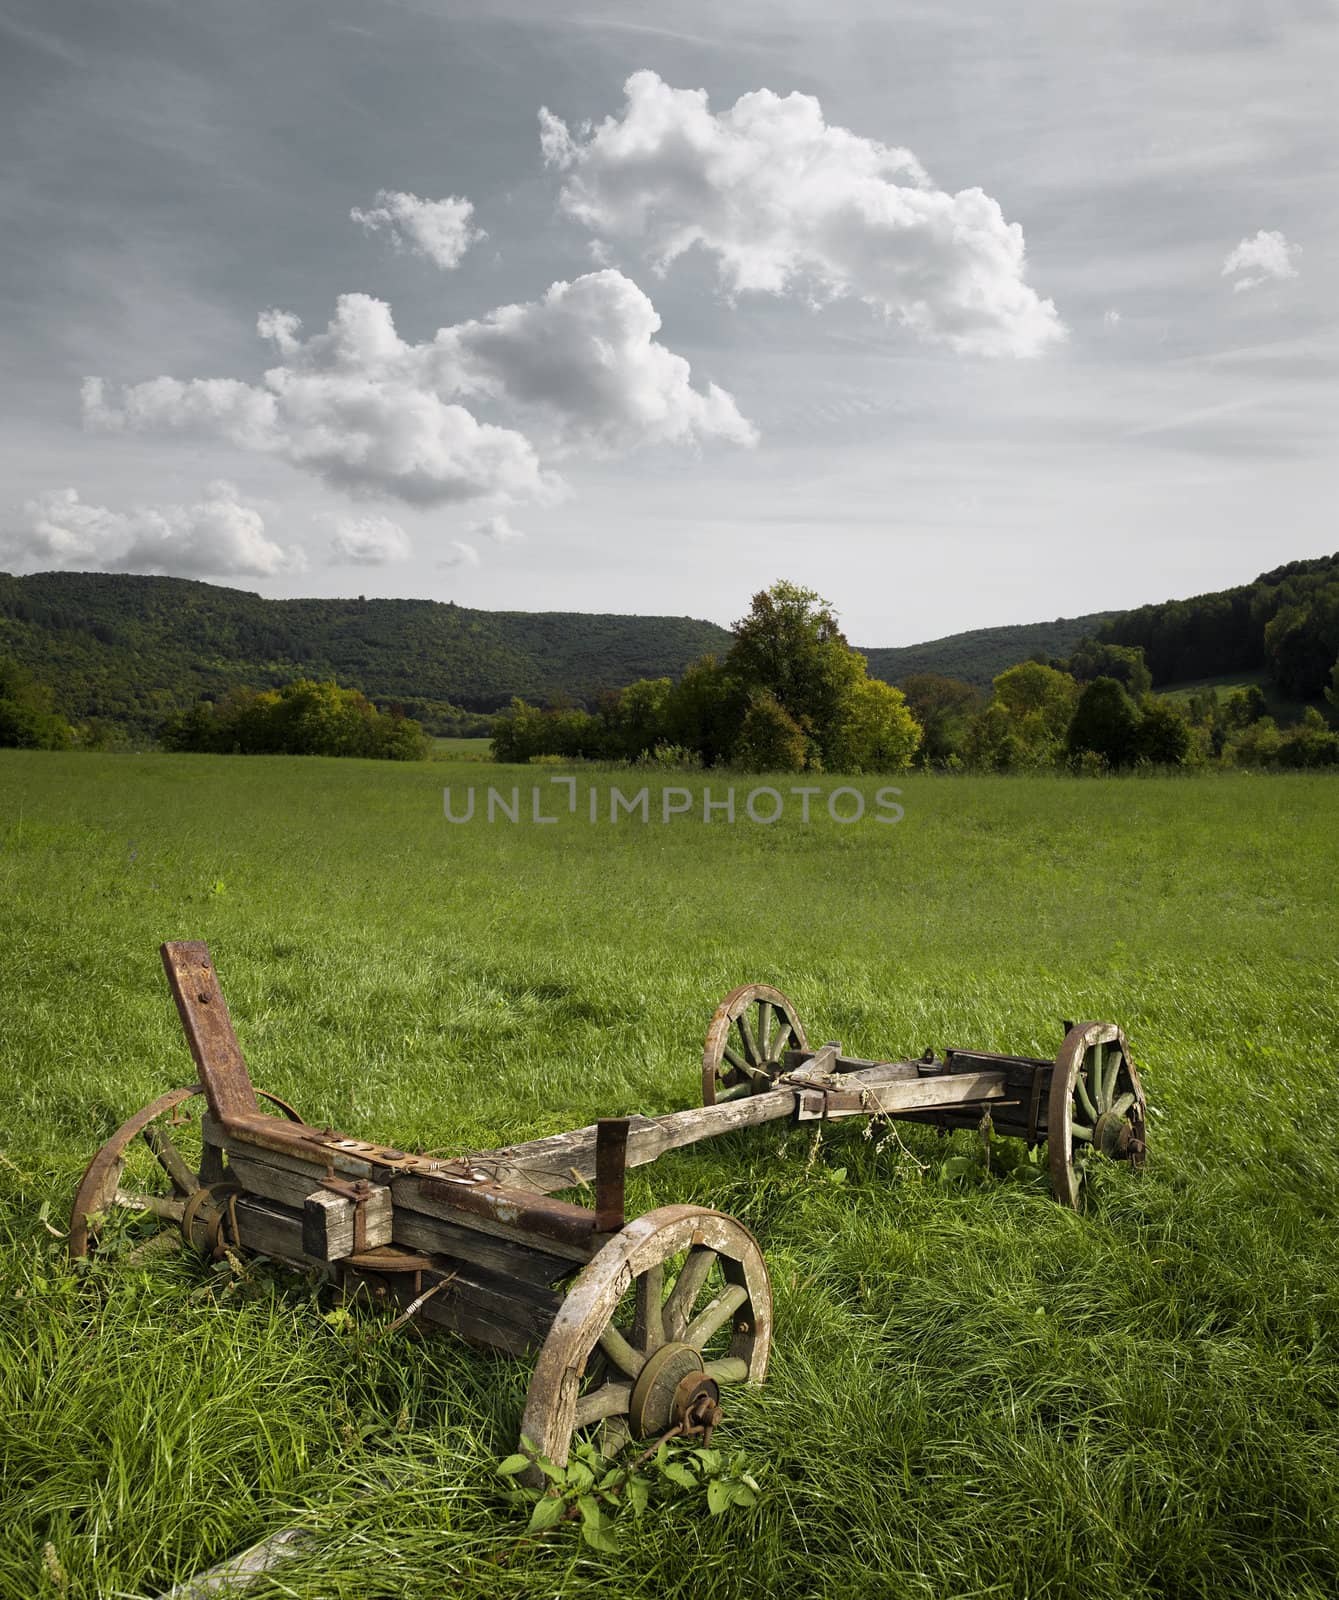 old wagon in the field
����